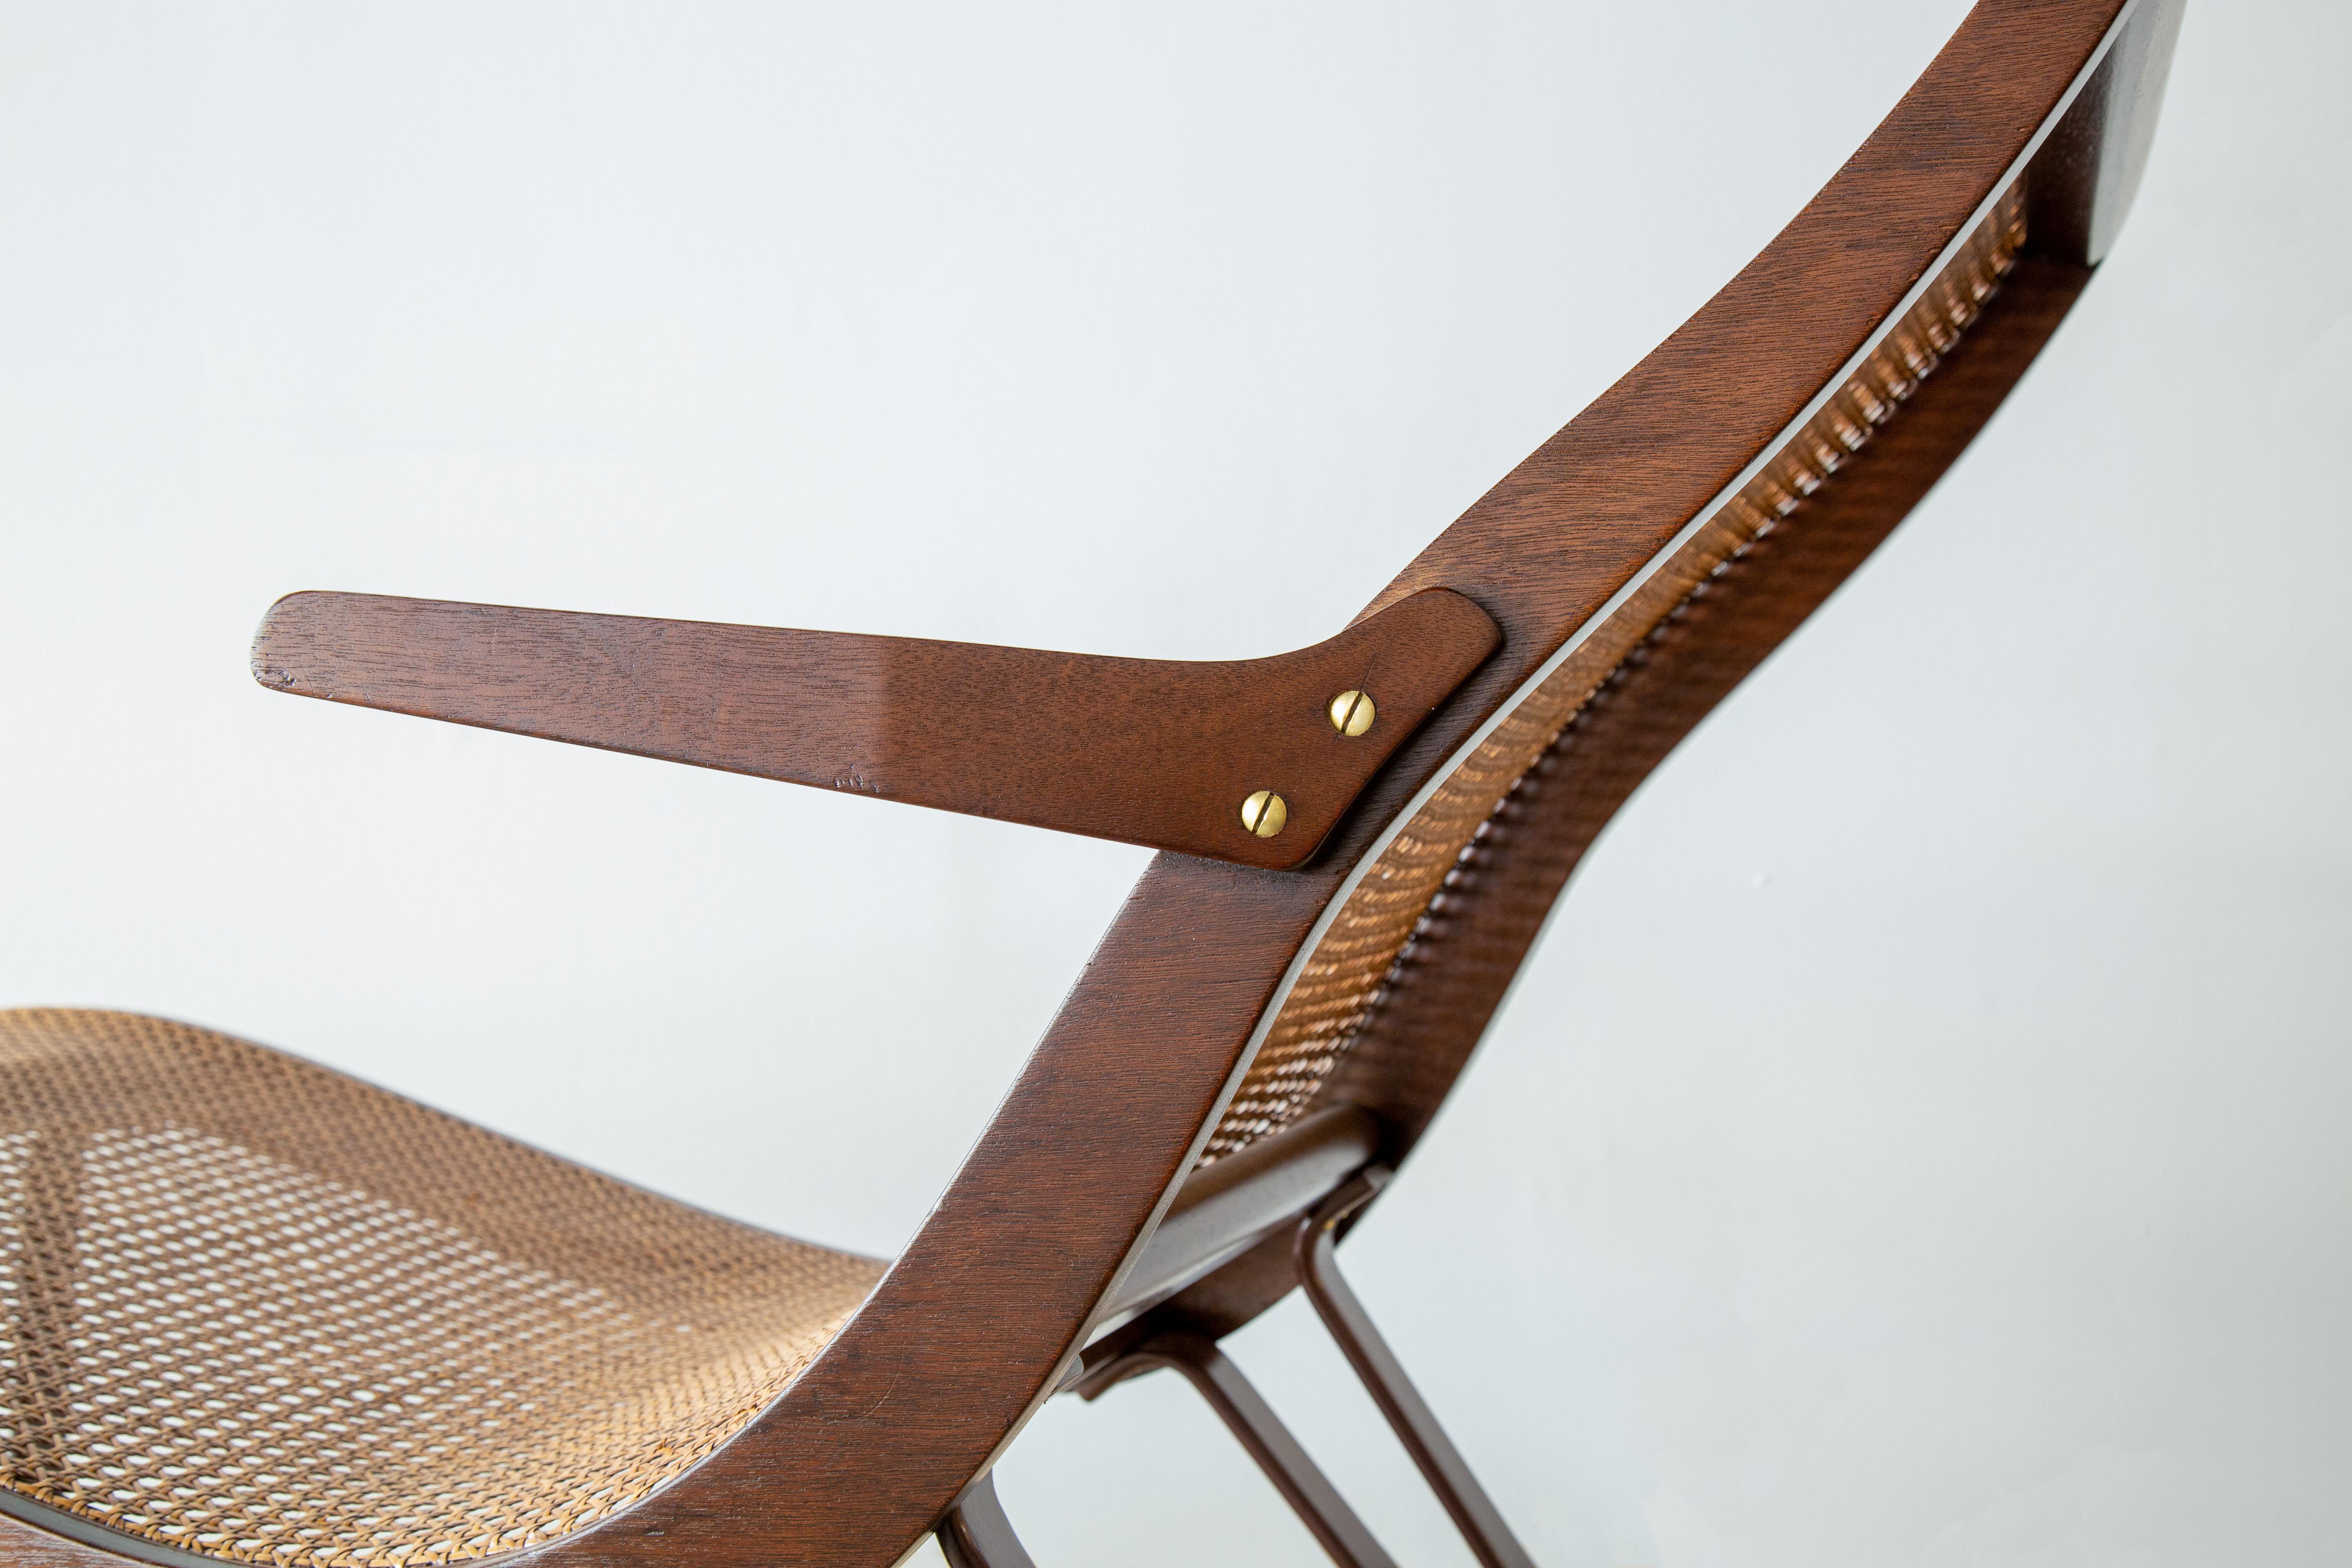 1950s Ultra Rare Cane and Mahogany Chaise designed by Edward Wormley for Dunbar 1